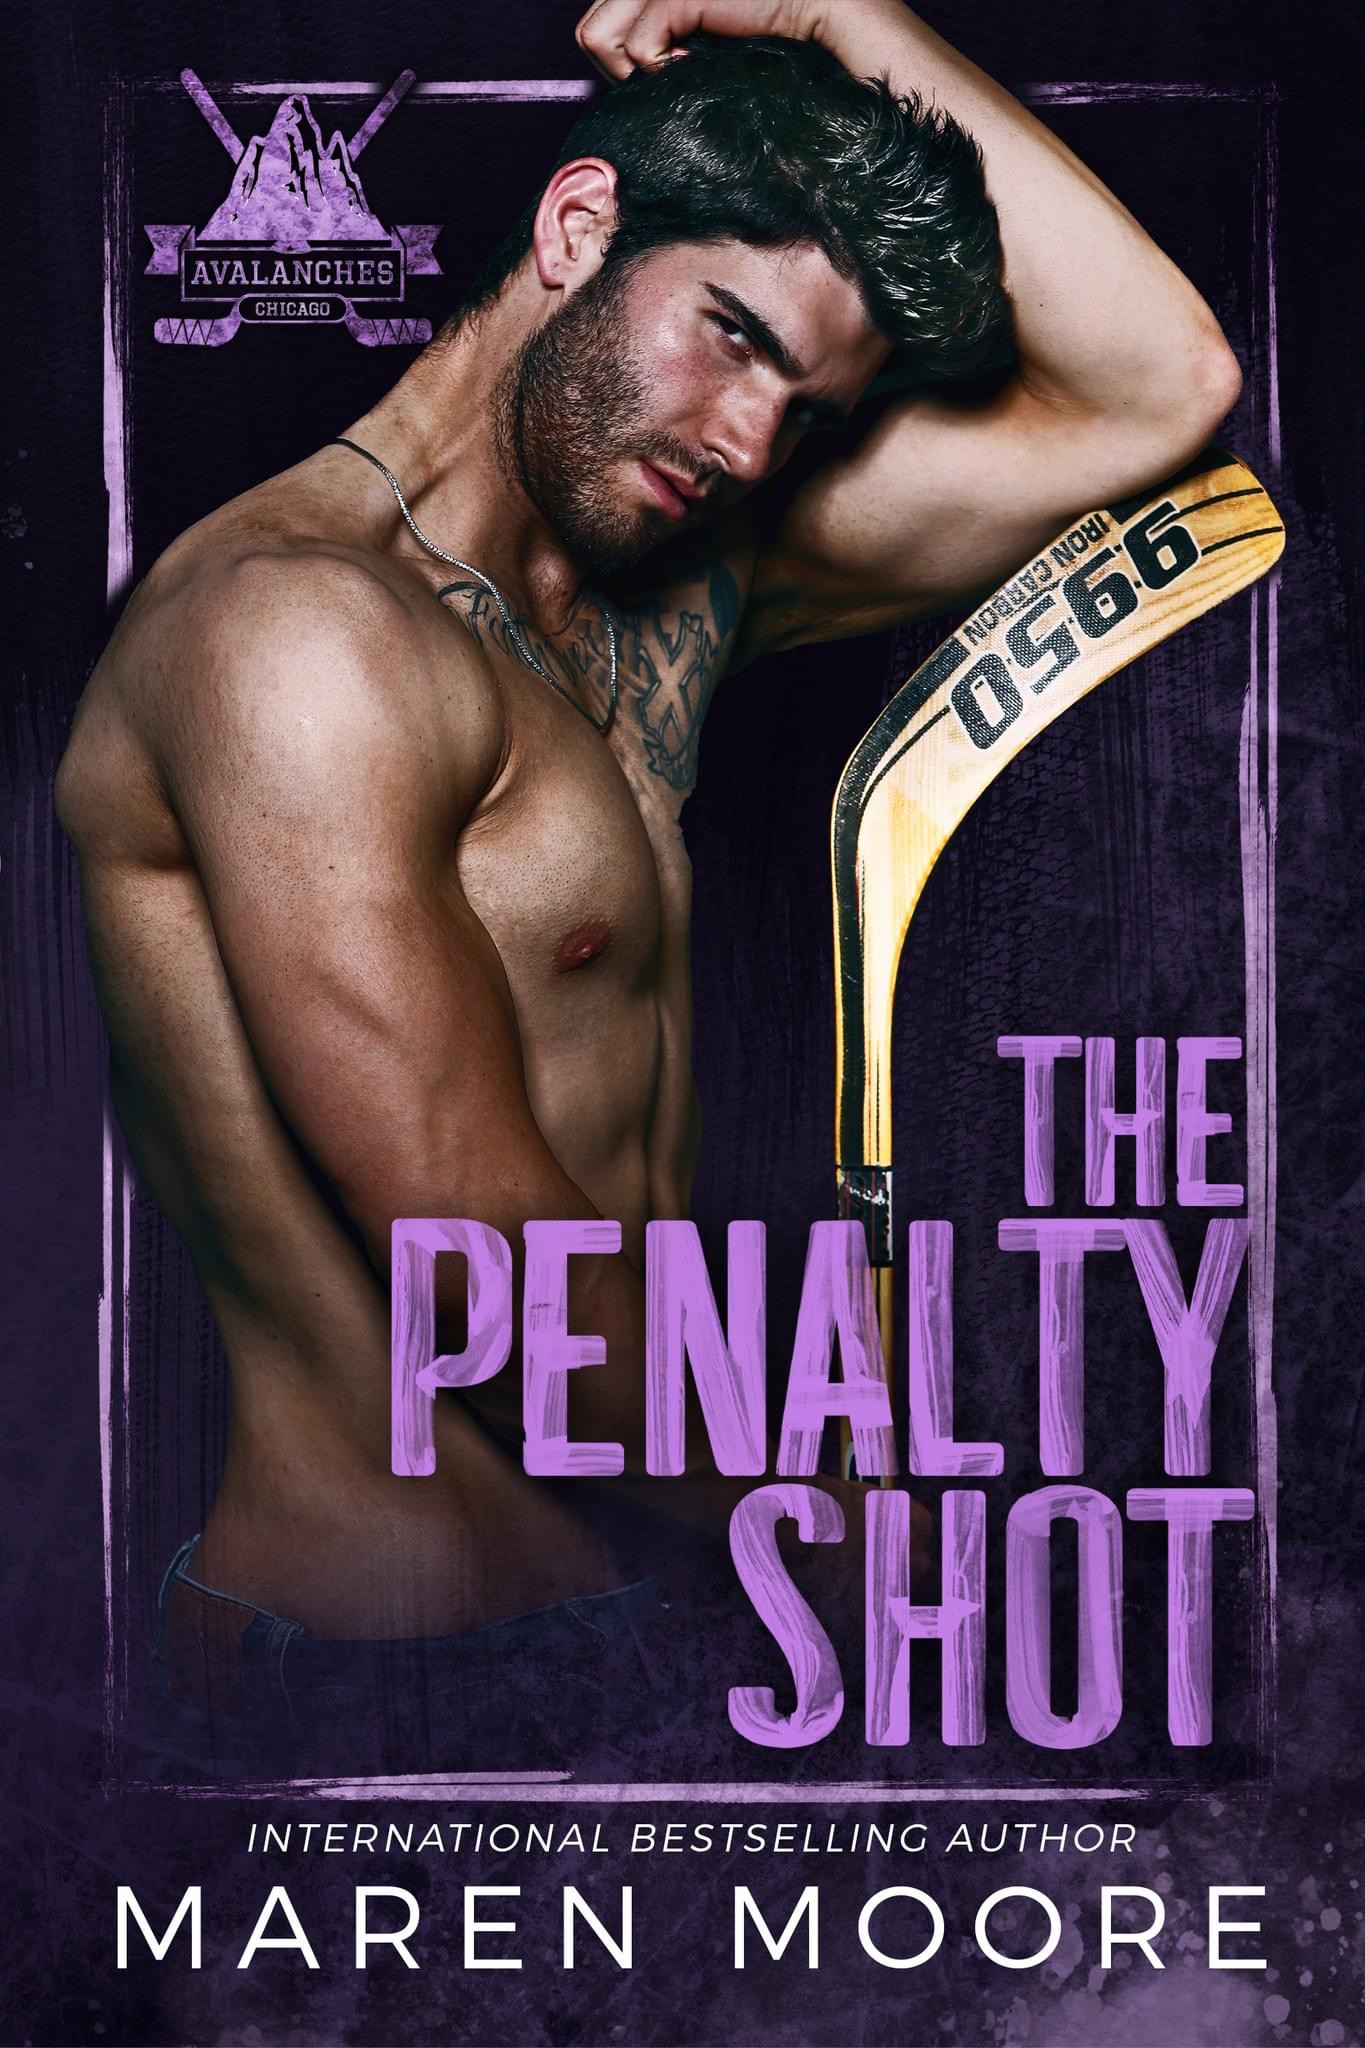 The Penalty Shot by Maren Moore ePub Download